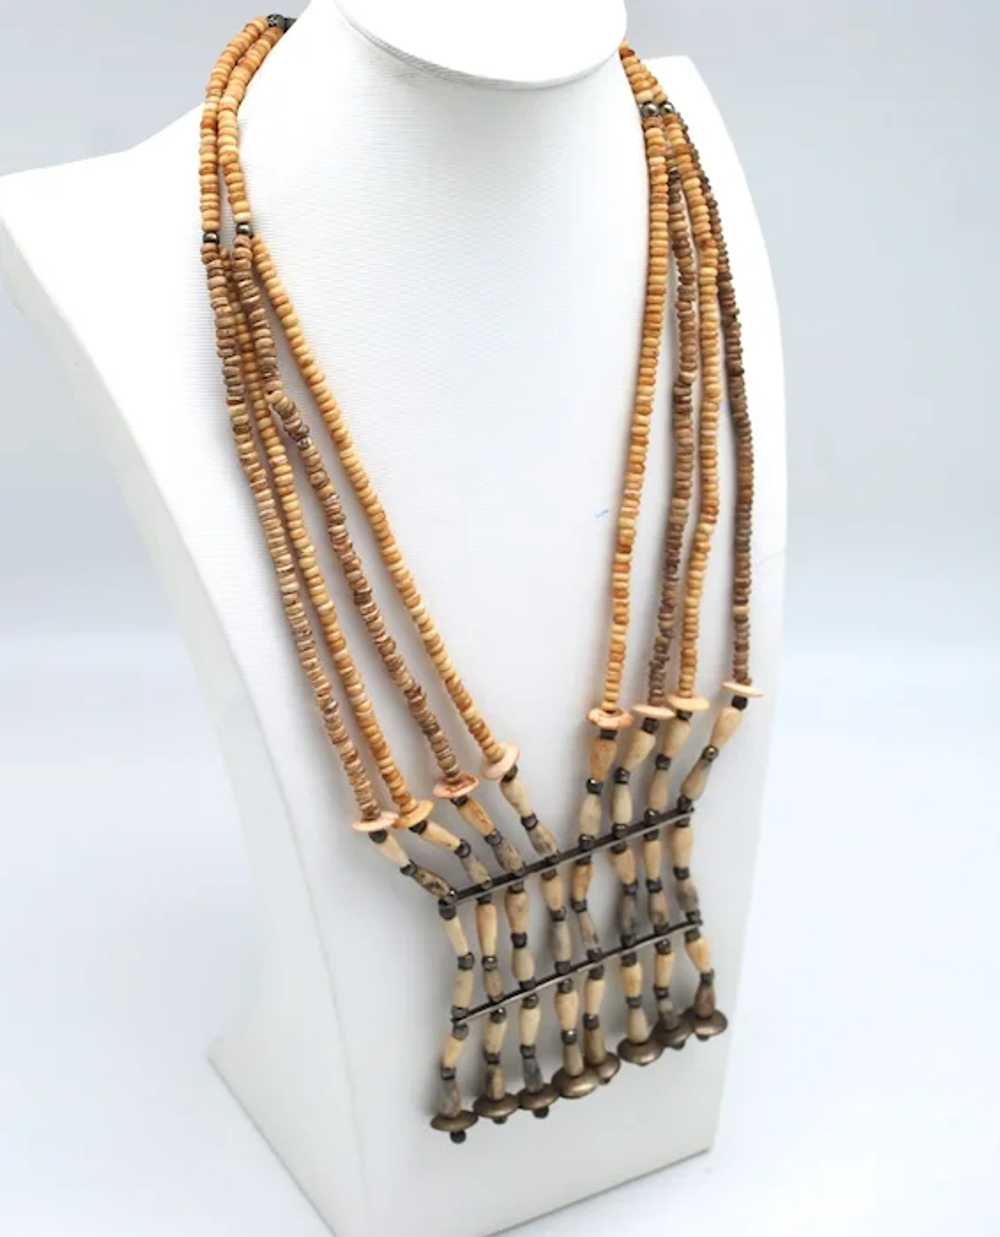 Multi Strand Bone, Horn and Metal Bead Necklace - image 3